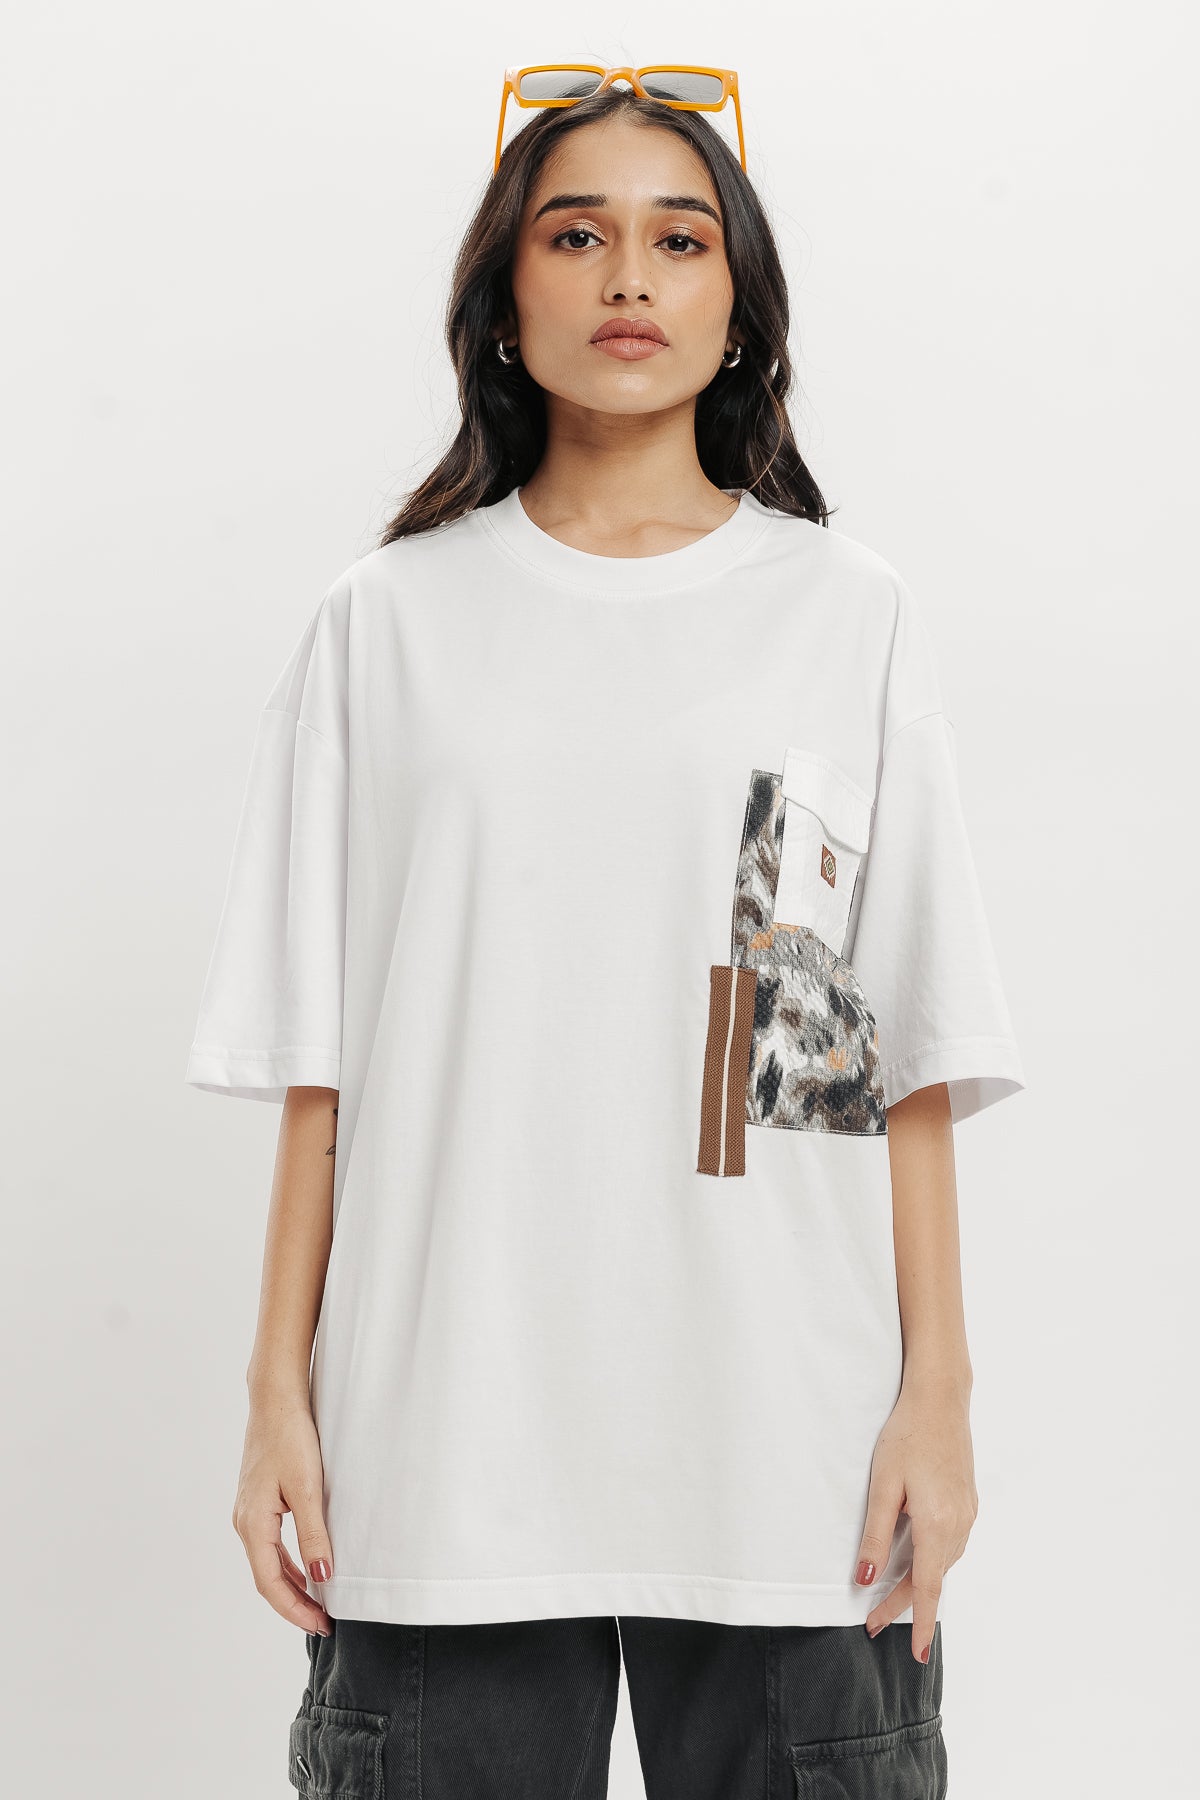 PATCHWORK WHITE T-SHIRT